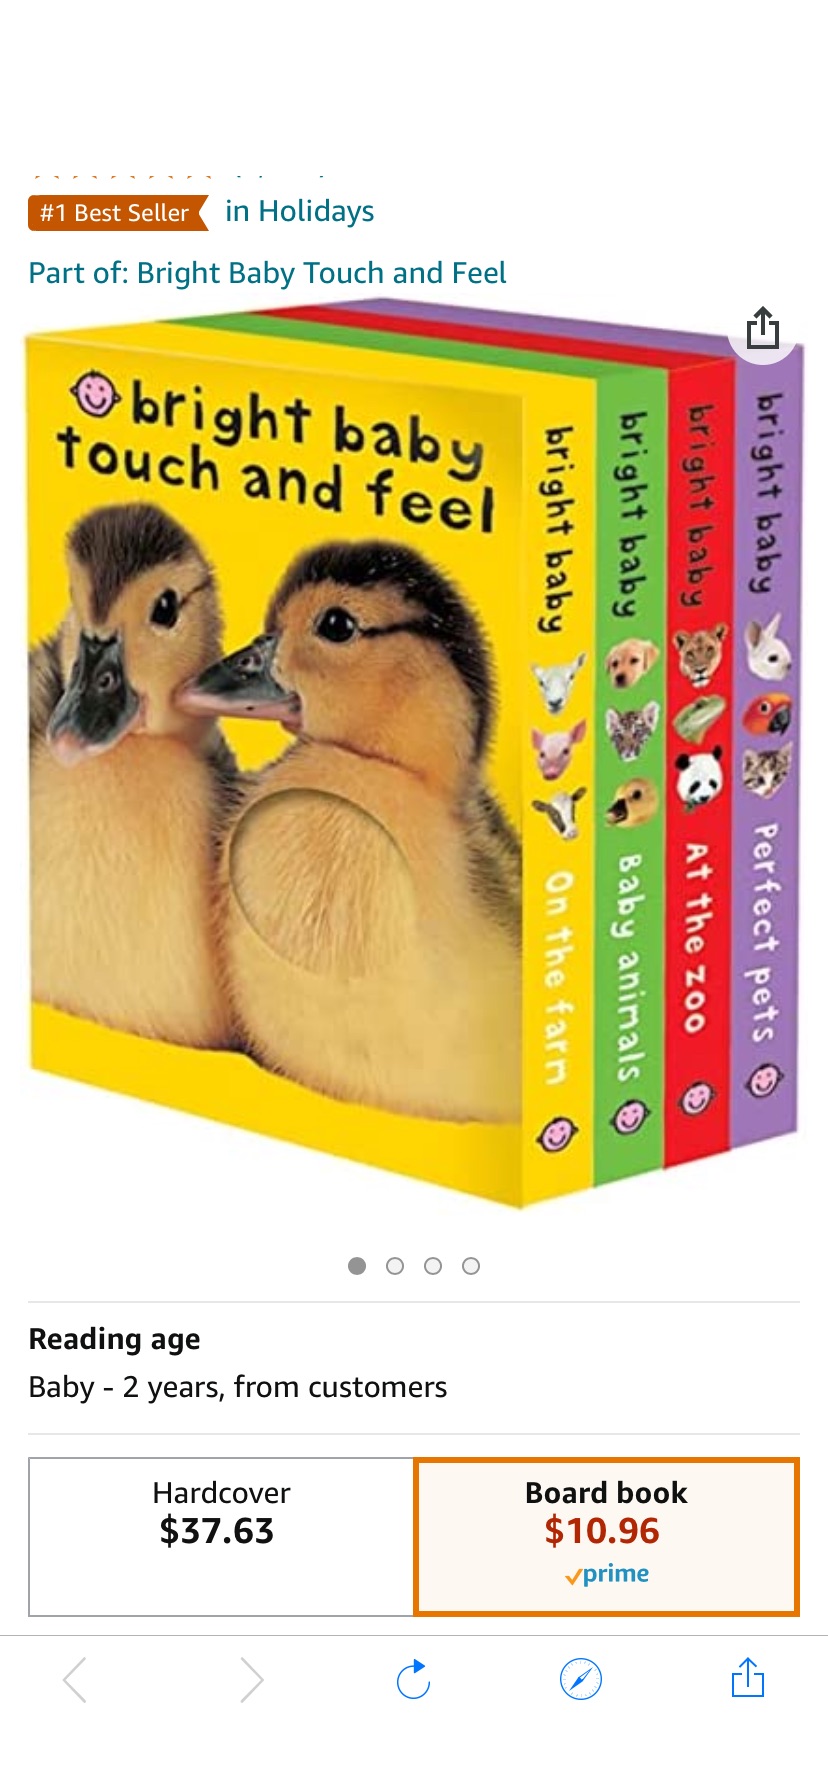 Amazon.com: Bright Baby Touch & Feel Boxed Set: On the Farm, Baby Animals, At the Zoo and Perfect Pets (Bright Baby Touch and Feel): 9780312498726: Priddy, Roger: Books